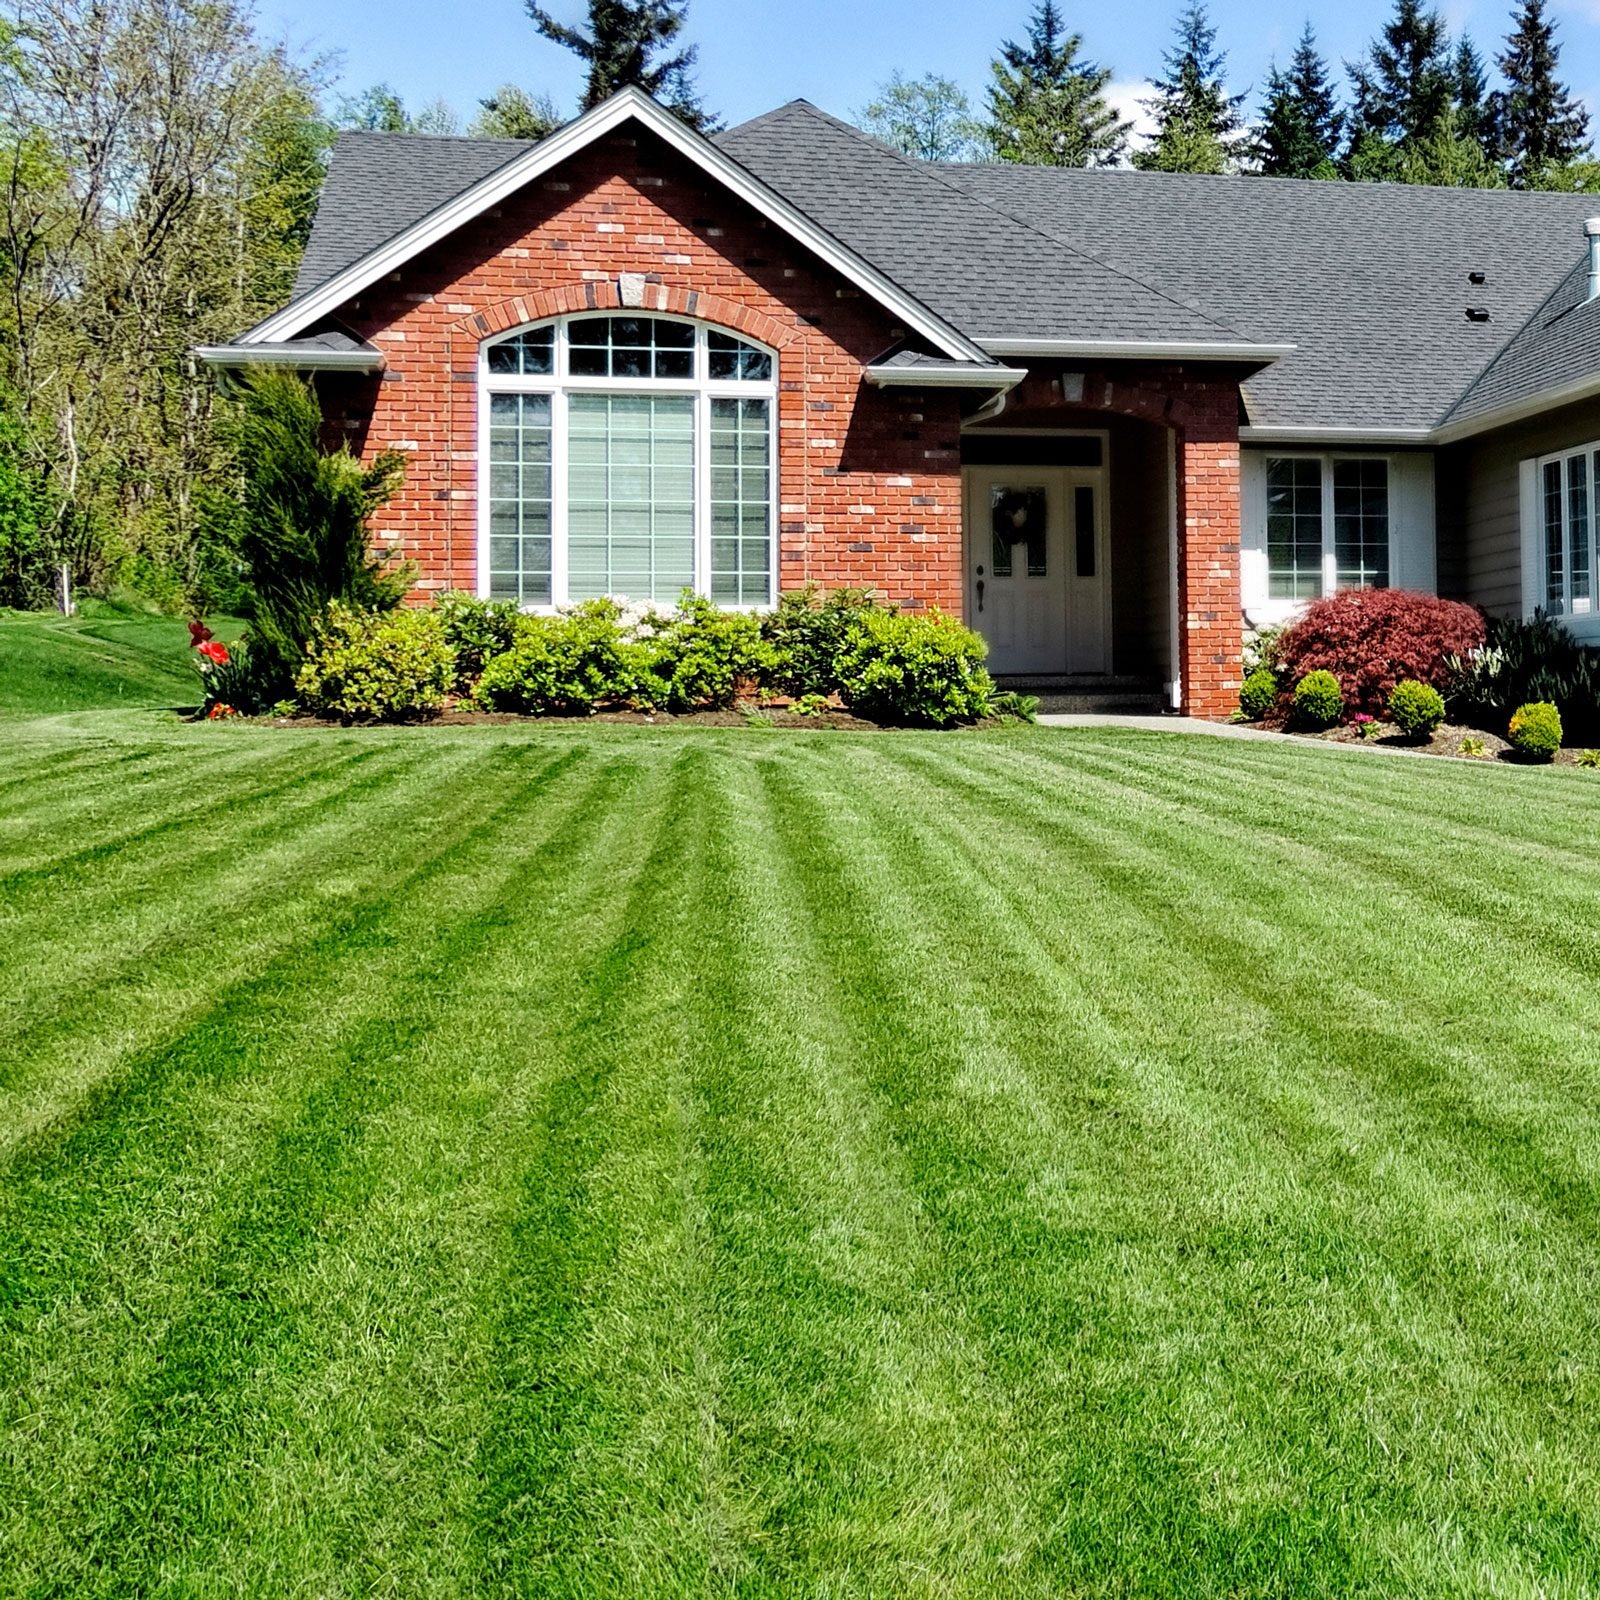 Lawn Care: How to Repair a Lawn